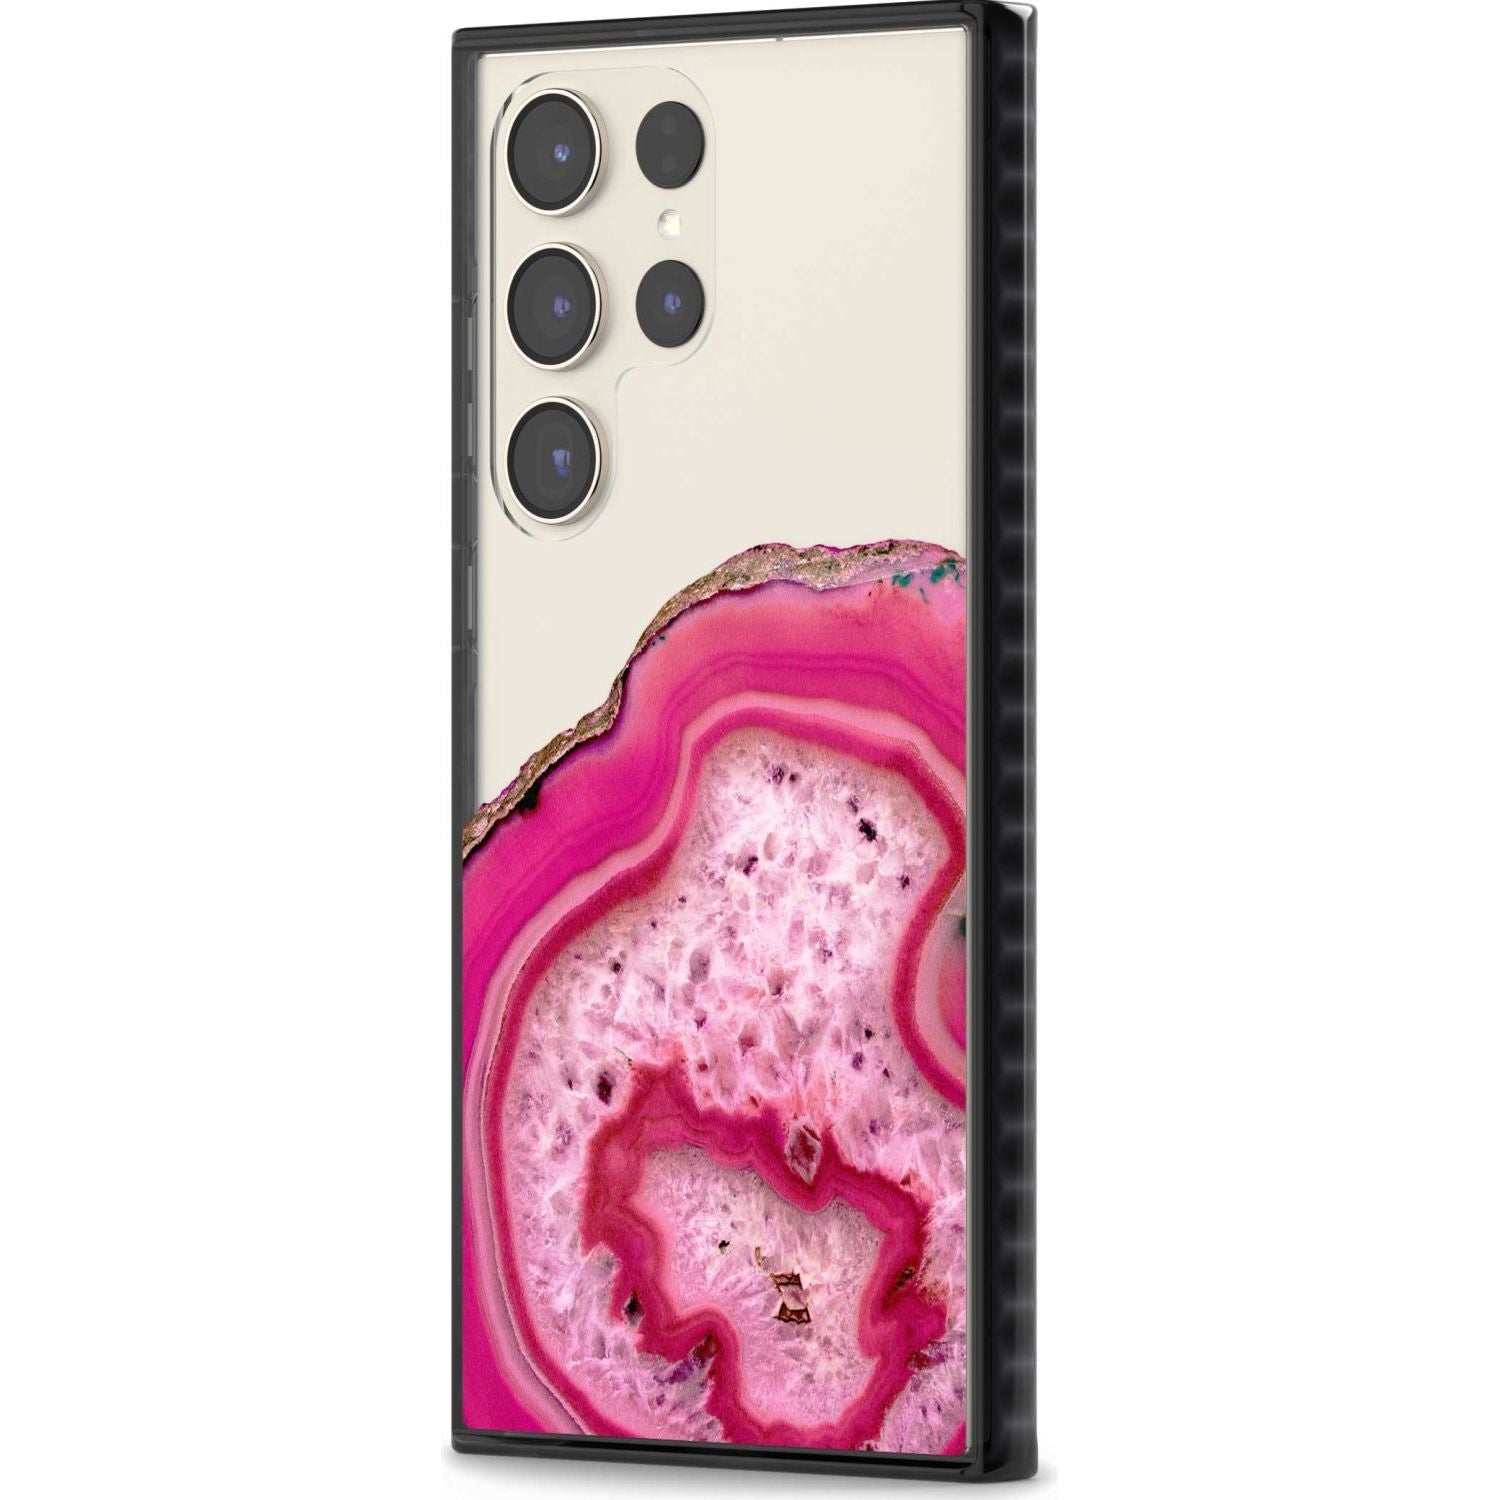 Bright Pink Gemstone Crystal Clear Design Phone Case iPhone 15 Pro Max / Black Impact Case,iPhone 15 Plus / Black Impact Case,iPhone 15 Pro / Black Impact Case,iPhone 15 / Black Impact Case,iPhone 15 Pro Max / Impact Case,iPhone 15 Plus / Impact Case,iPhone 15 Pro / Impact Case,iPhone 15 / Impact Case,iPhone 15 Pro Max / Magsafe Black Impact Case,iPhone 15 Plus / Magsafe Black Impact Case,iPhone 15 Pro / Magsafe Black Impact Case,iPhone 15 / Magsafe Black Impact Case,iPhone 14 Pro Max / Black Impact Case,iP